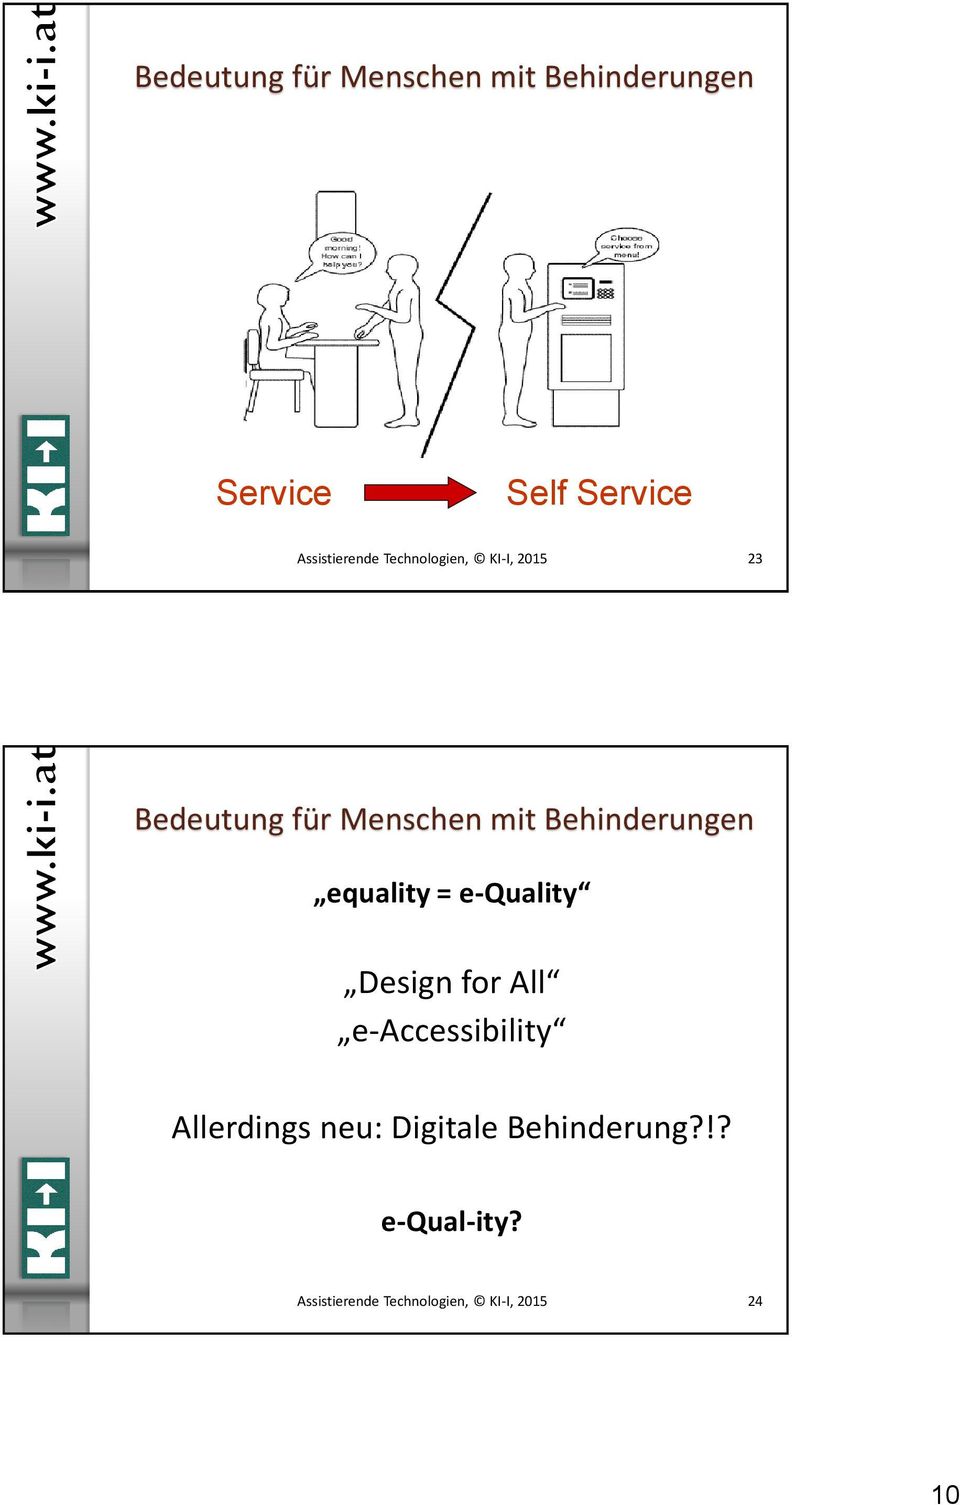 Behinderungen equality = e-quality Design for All e-accessibility